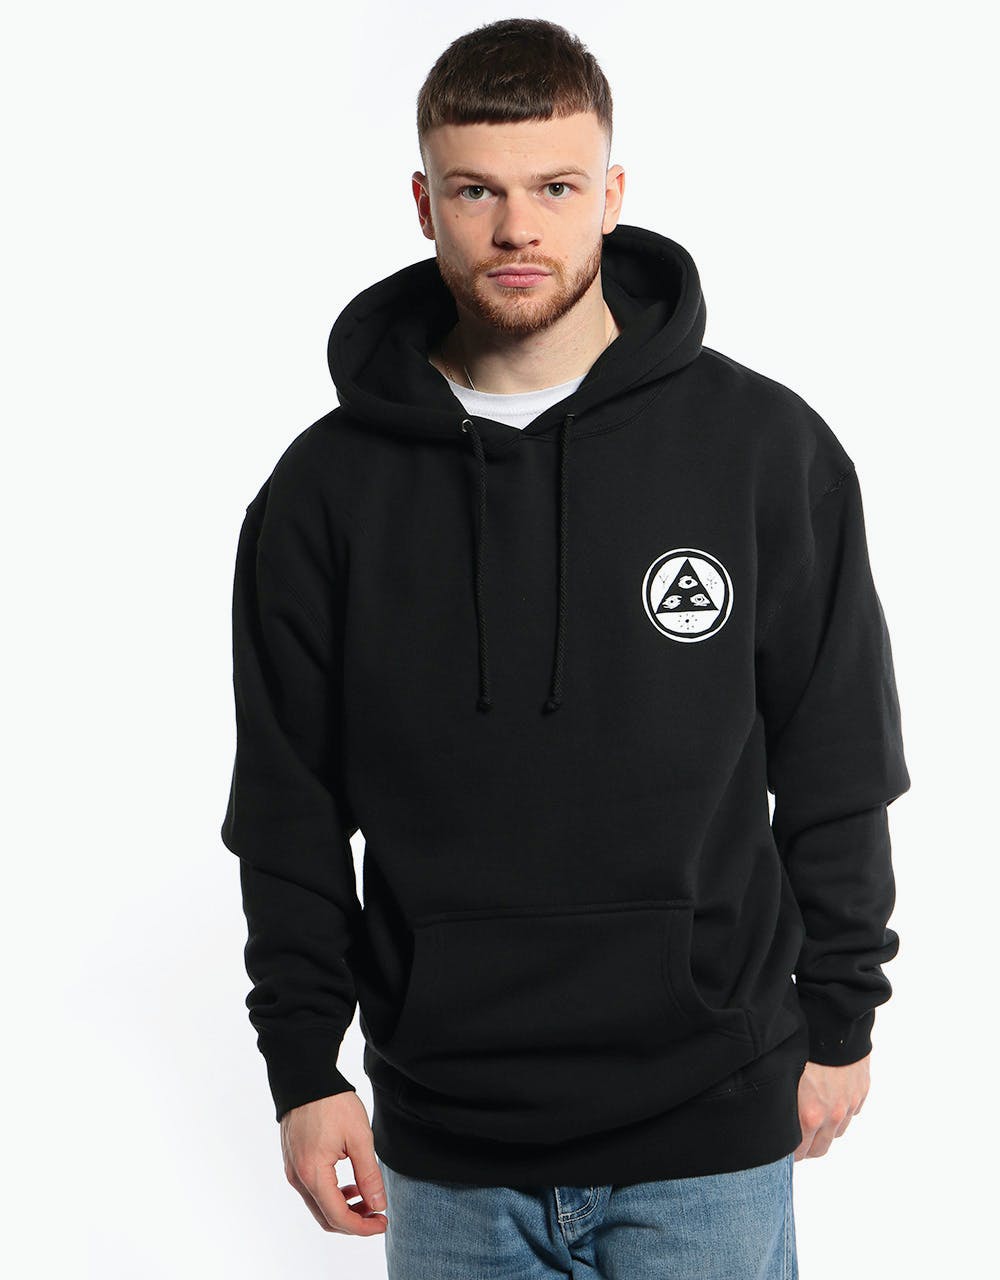 Welcome Sloth Pullover Hoodie - Black/White Puff